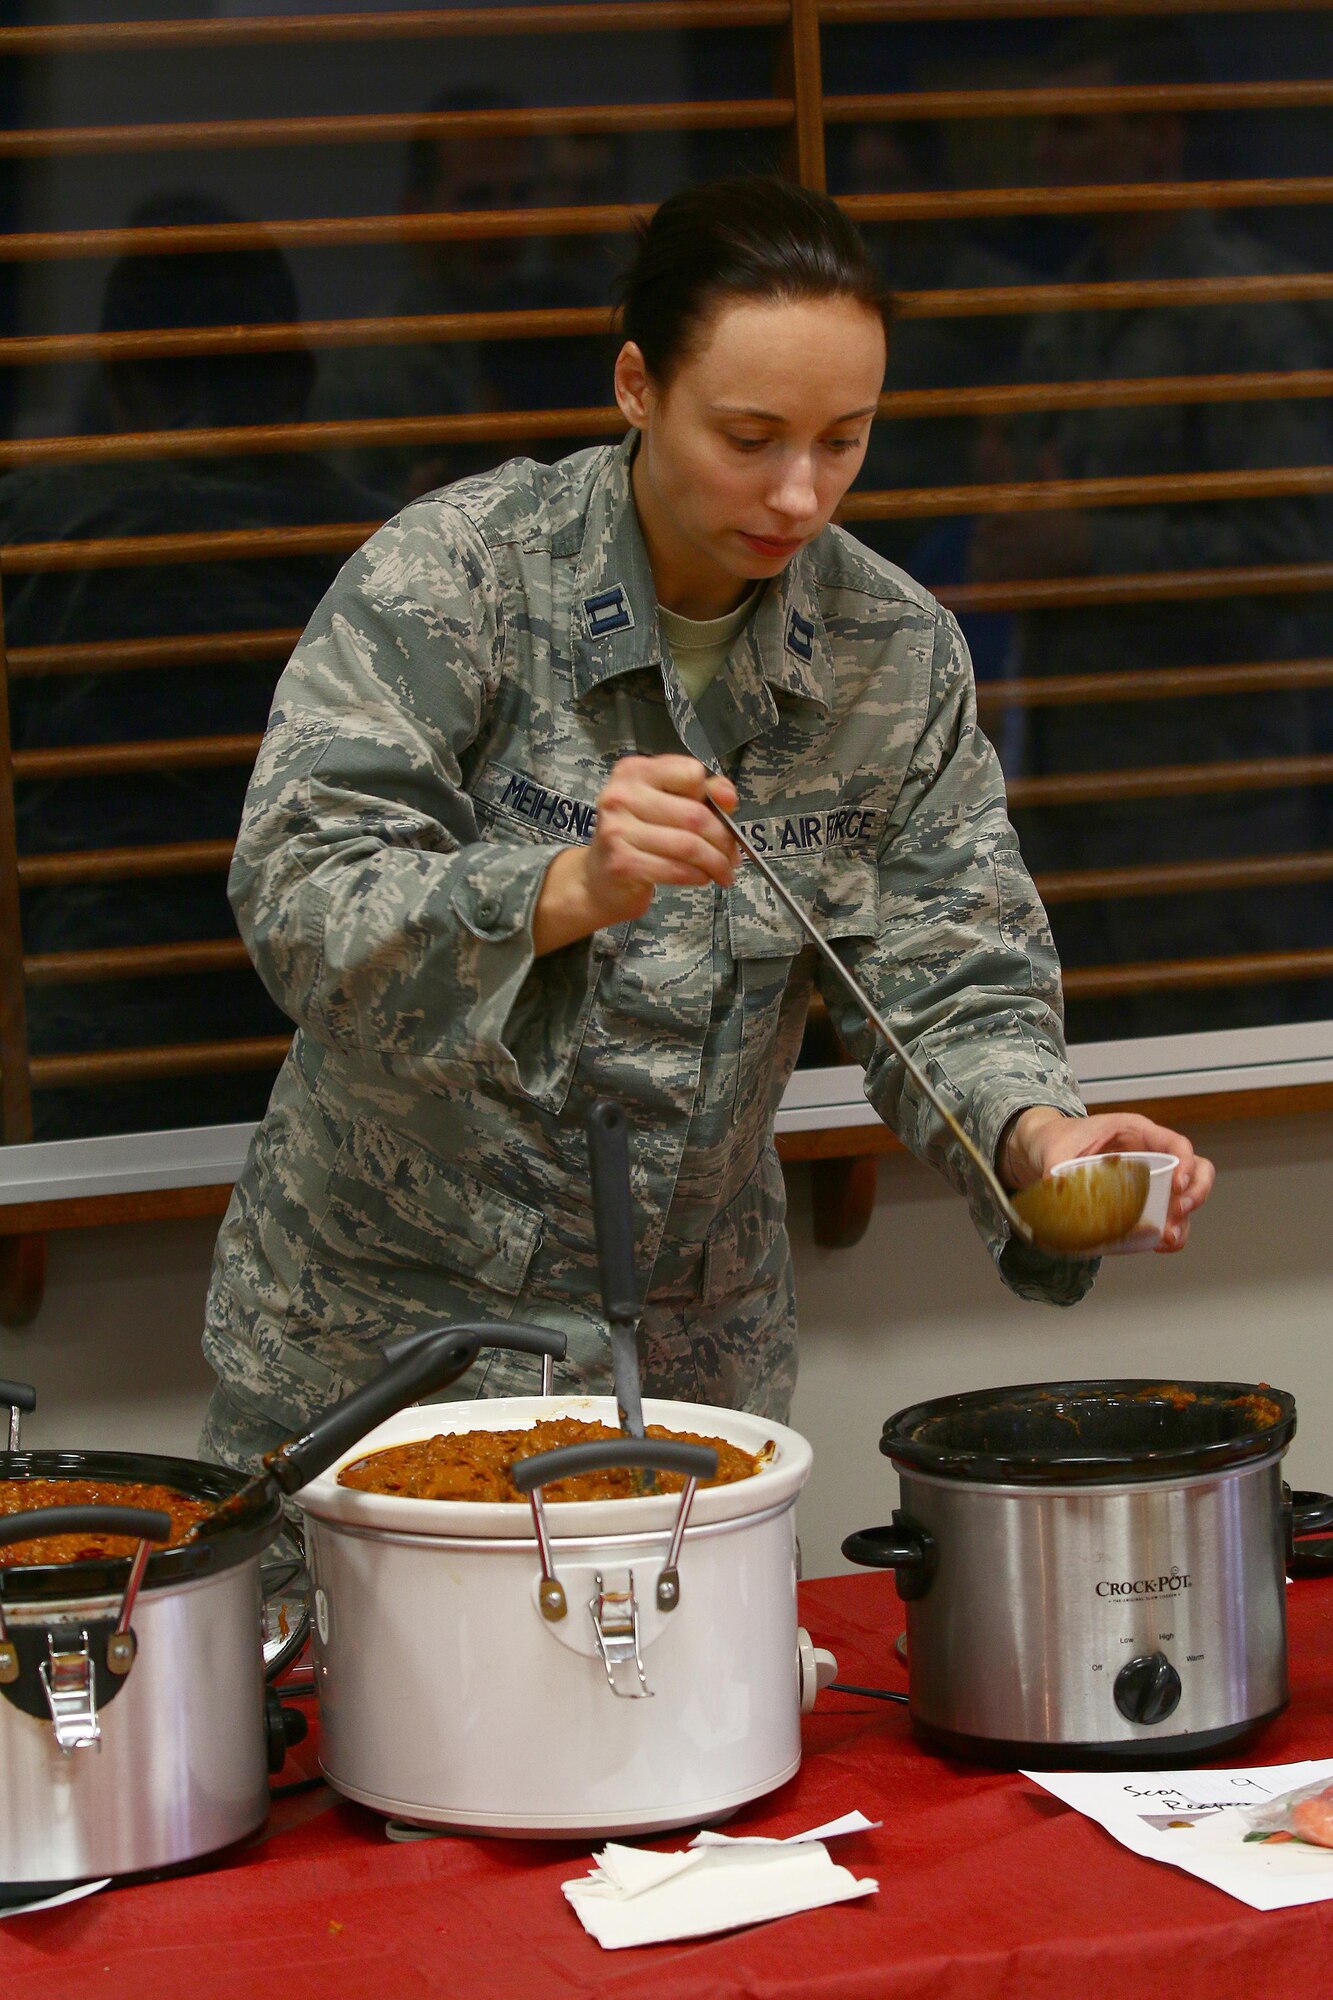 Capt. Ashley Meihsner, 64th Intelligence Squadron, takes a sample of chili for taste and texture while judging the 2016 655th Intelligence, Surveillance and Reconnaissance Group Chili Cook-Off at the USO here Nov. 19, 2016. The four categories were: best overall, spiciest, white chili and most creative. Capt. James Spindler, 64th IS, was selected as the overall winner of the contest. (U.S. Air Force photo /Tech. Sgt. Patrick O’Reilly)